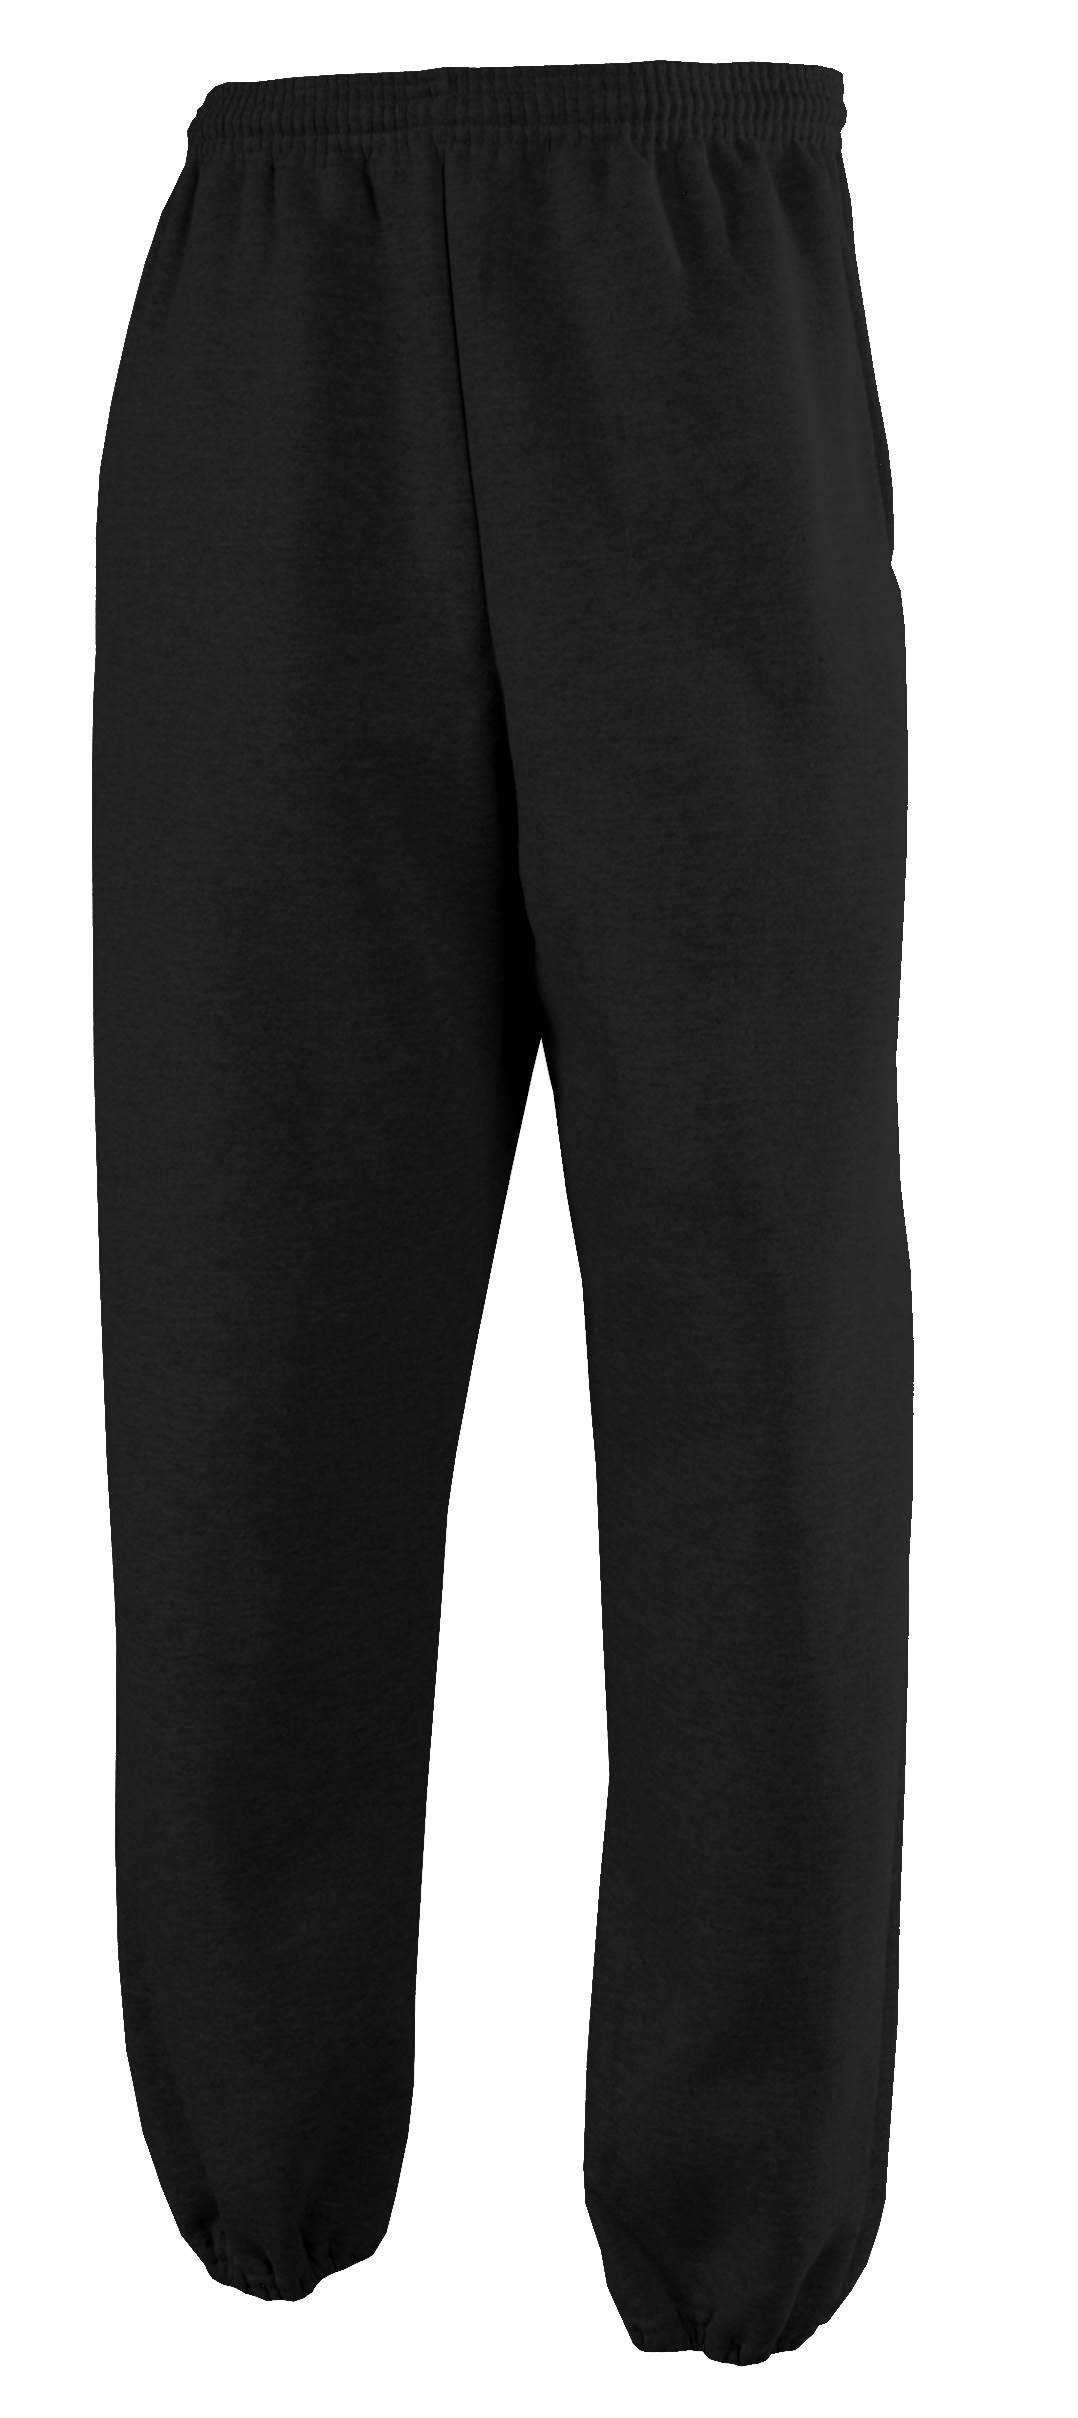 Picture of Russell Adult Dri-Power Fleece Pant